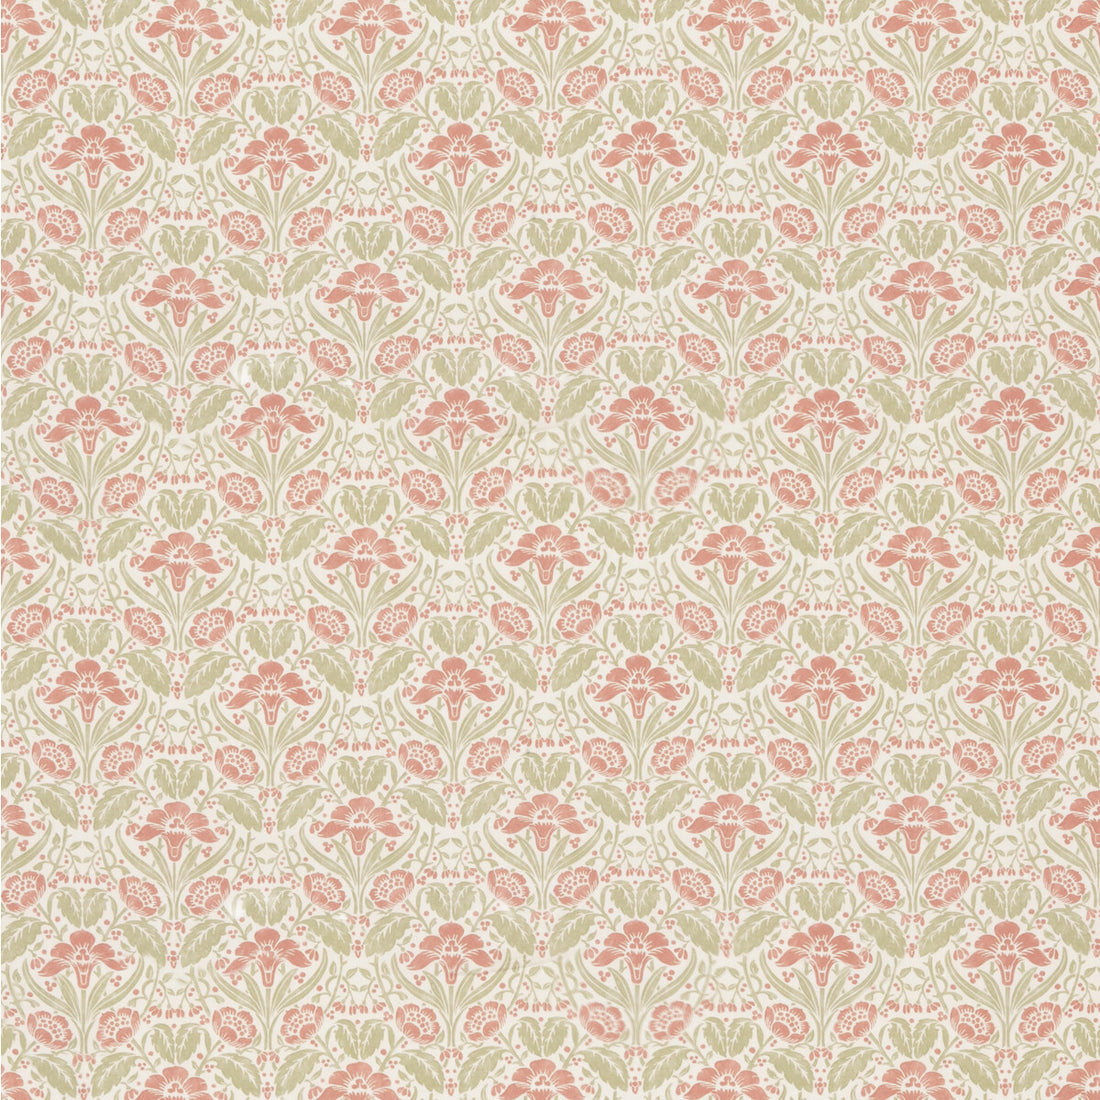 Iris Meadow Cotton fabric in pink/green color - pattern BP10968.1.0 - by G P &amp; J Baker in the Original Brantwood Fabric collection